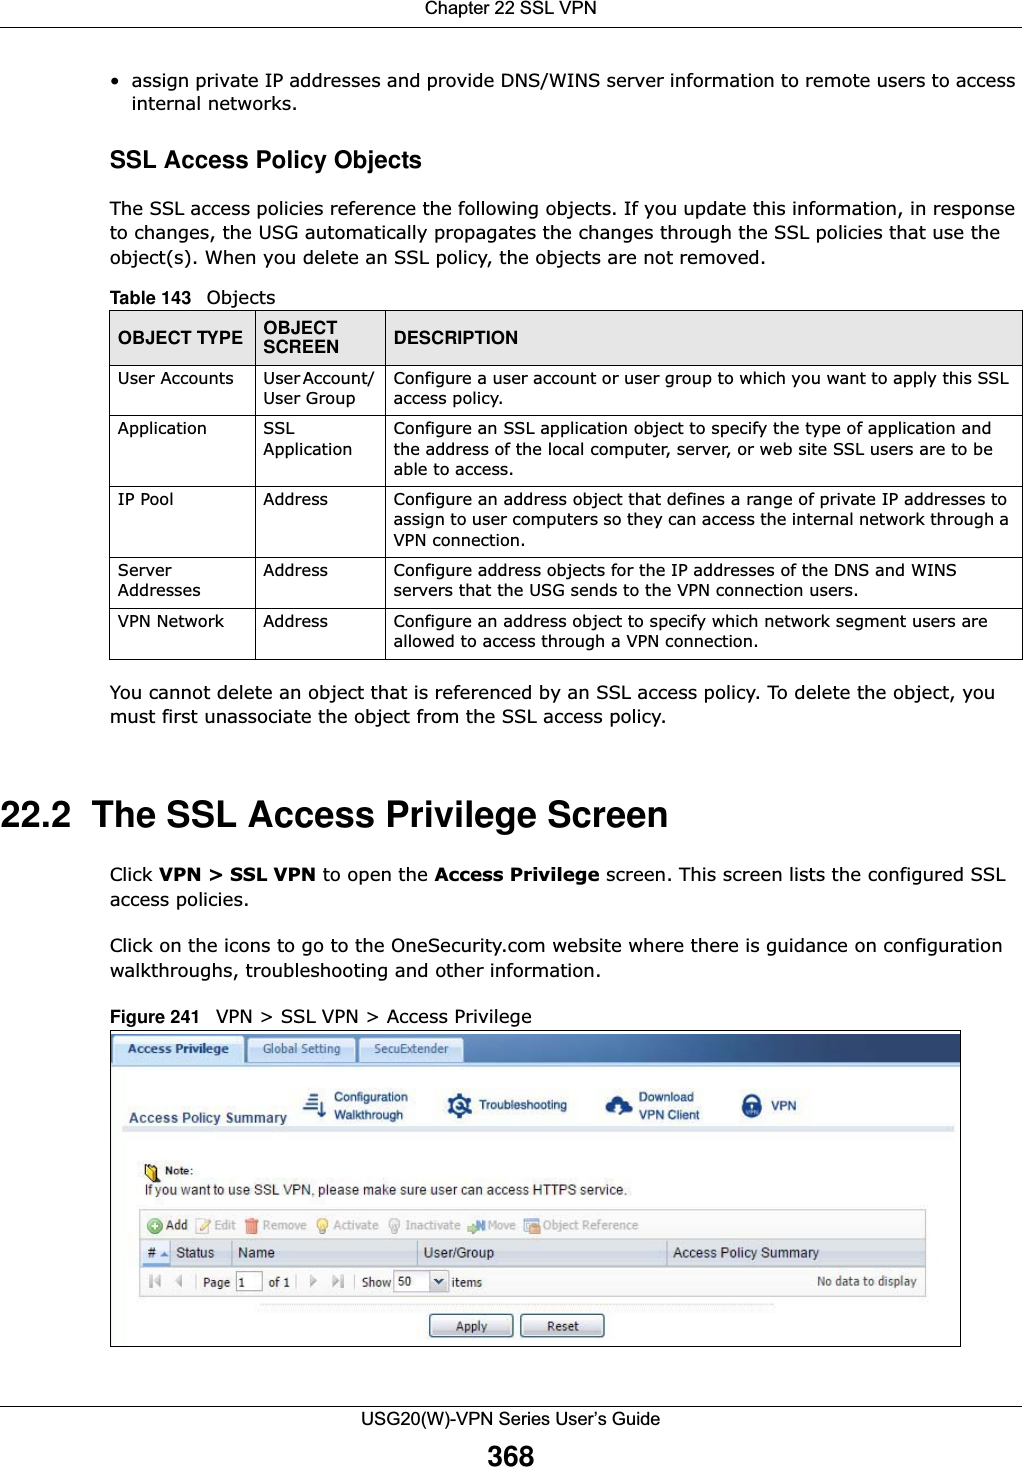 Chapter 22 SSL VPNUSG20(W)-VPN Series User’s Guide368• assign private IP addresses and provide DNS/WINS server information to remote users to access internal networks.SSL Access Policy ObjectsThe SSL access policies reference the following objects. If you update this information, in response to changes, the USG automatically propagates the changes through the SSL policies that use the object(s). When you delete an SSL policy, the objects are not removed.  You cannot delete an object that is referenced by an SSL access policy. To delete the object, you must first unassociate the object from the SSL access policy. 22.2  The SSL Access Privilege ScreenClick VPN &gt; SSL VPN to open the Access Privilege screen. This screen lists the configured SSL access policies. Click on the icons to go to the OneSecurity.com website where there is guidance on configuration walkthroughs, troubleshooting and other information.Figure 241   VPN &gt; SSL VPN &gt; Access Privilege Table 143   Objects OBJECT TYPE OBJECT SCREEN DESCRIPTIONUser Accounts User Account/ User GroupConfigure a user account or user group to which you want to apply this SSL access policy. Application SSL ApplicationConfigure an SSL application object to specify the type of application and the address of the local computer, server, or web site SSL users are to be able to access.IP Pool Address Configure an address object that defines a range of private IP addresses to assign to user computers so they can access the internal network through a VPN connection. Server AddressesAddress Configure address objects for the IP addresses of the DNS and WINS servers that the USG sends to the VPN connection users.VPN Network Address Configure an address object to specify which network segment users are allowed to access through a VPN connection. 